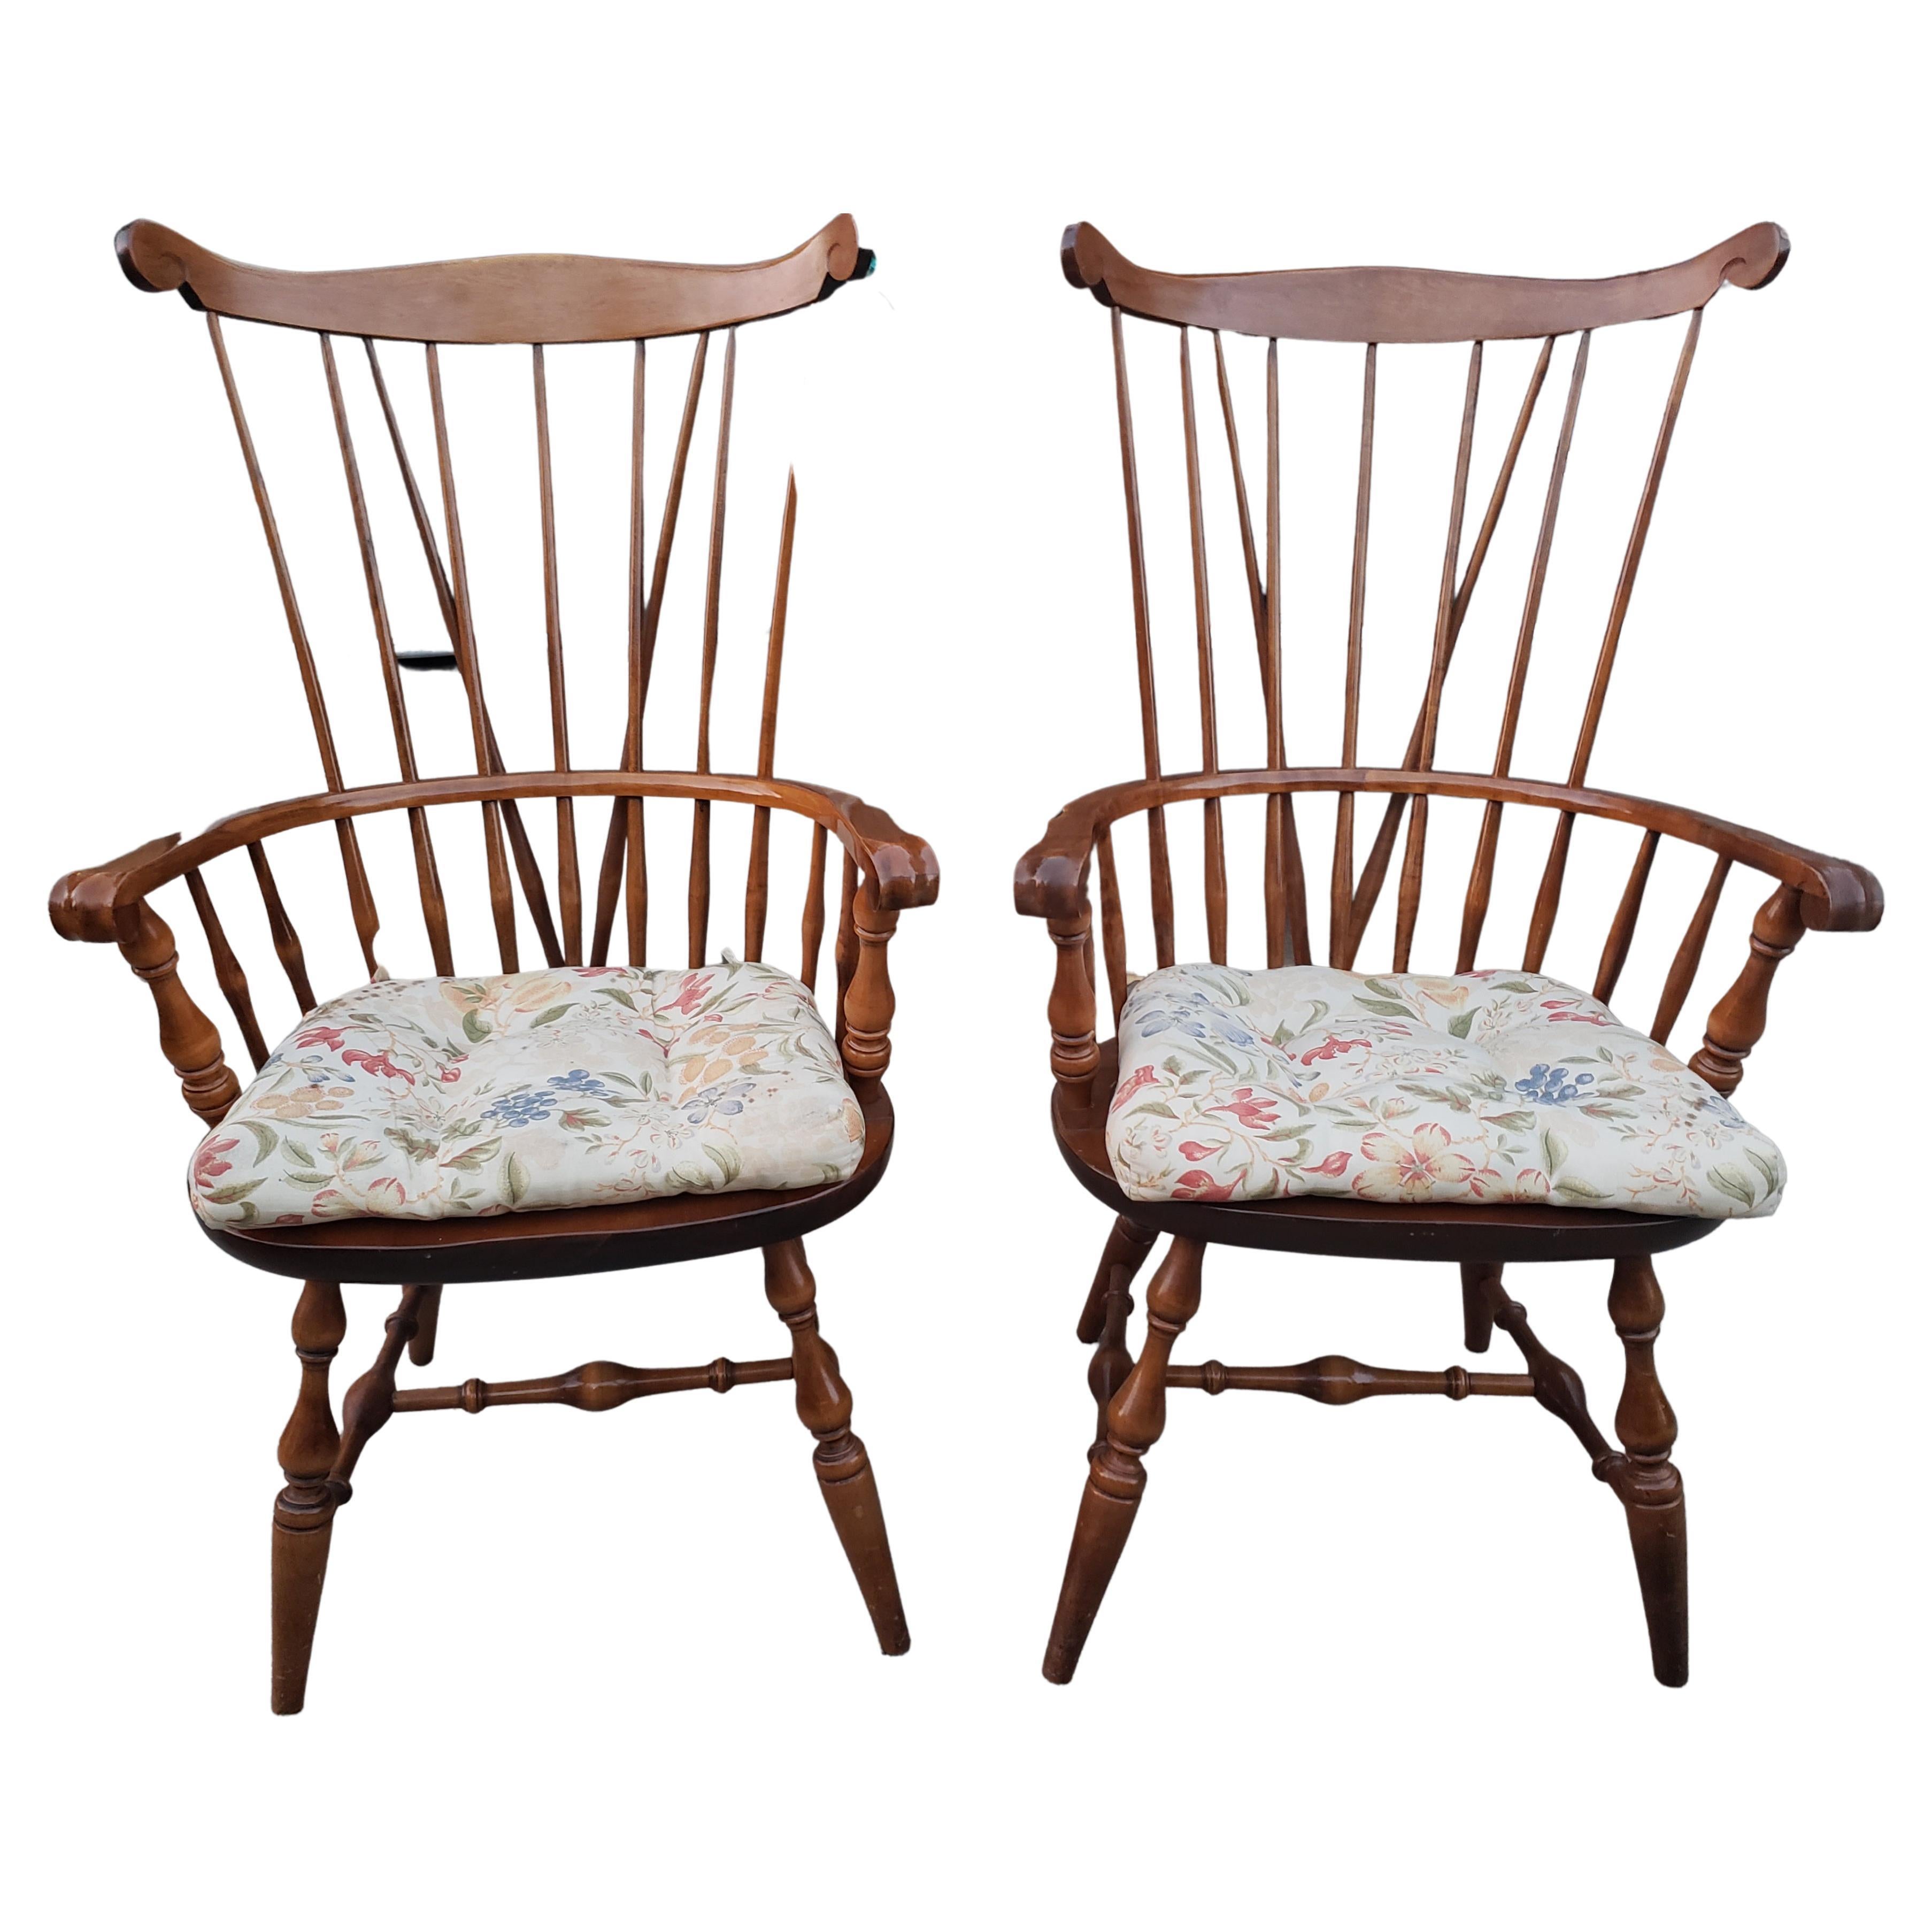 American Nichols & Stone Old Pine Finish Solid Maple Windsor Brace Back Arm Chairs, Pair For Sale